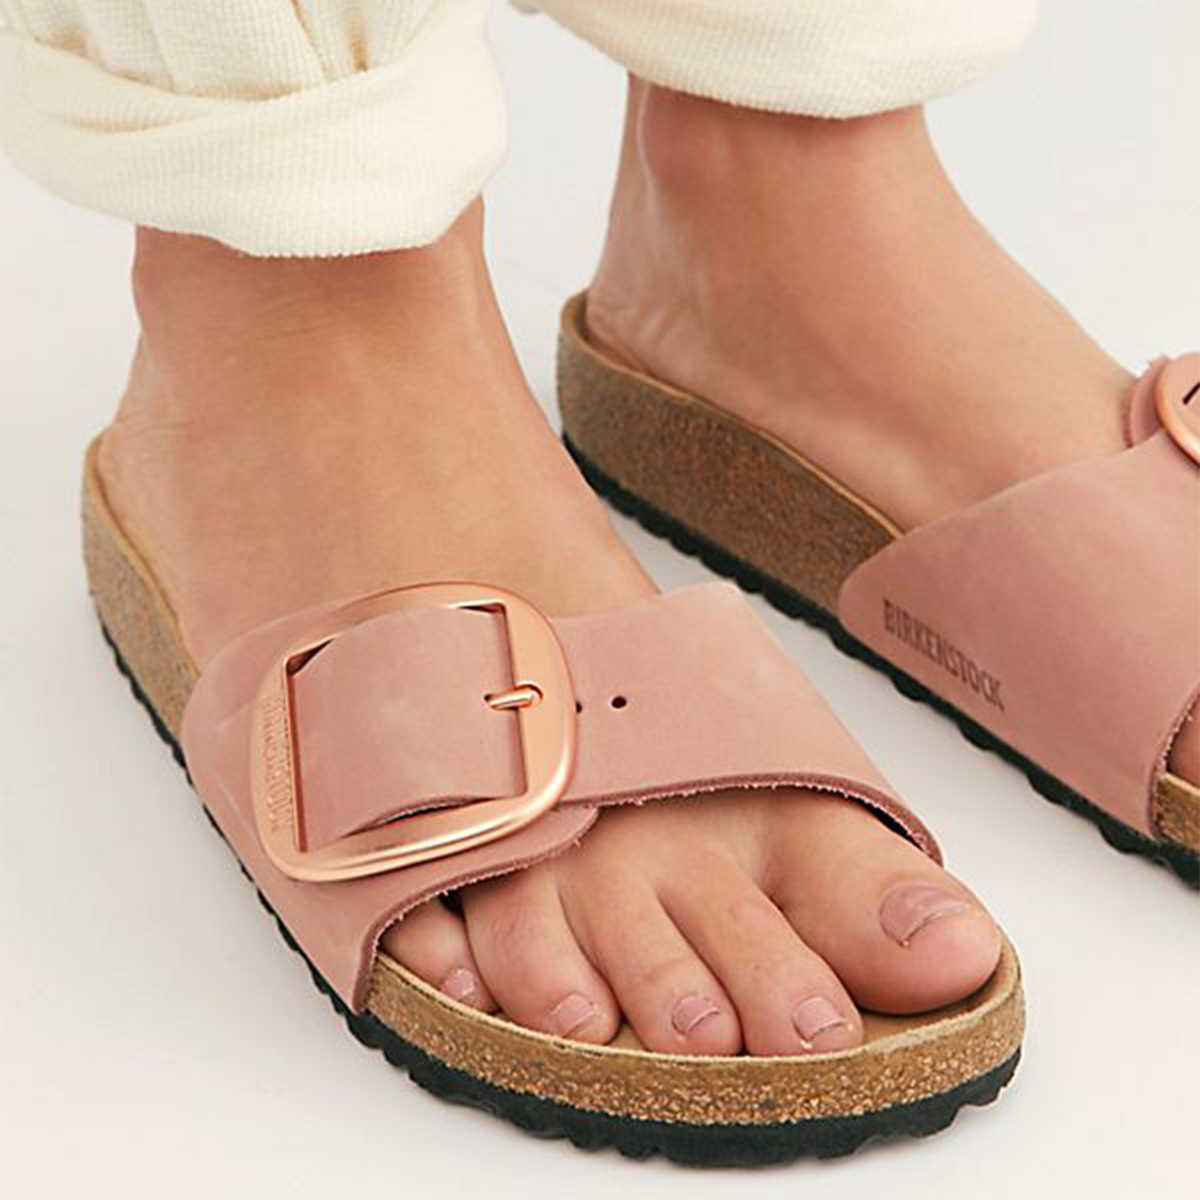 how to clean dirty birkenstocks